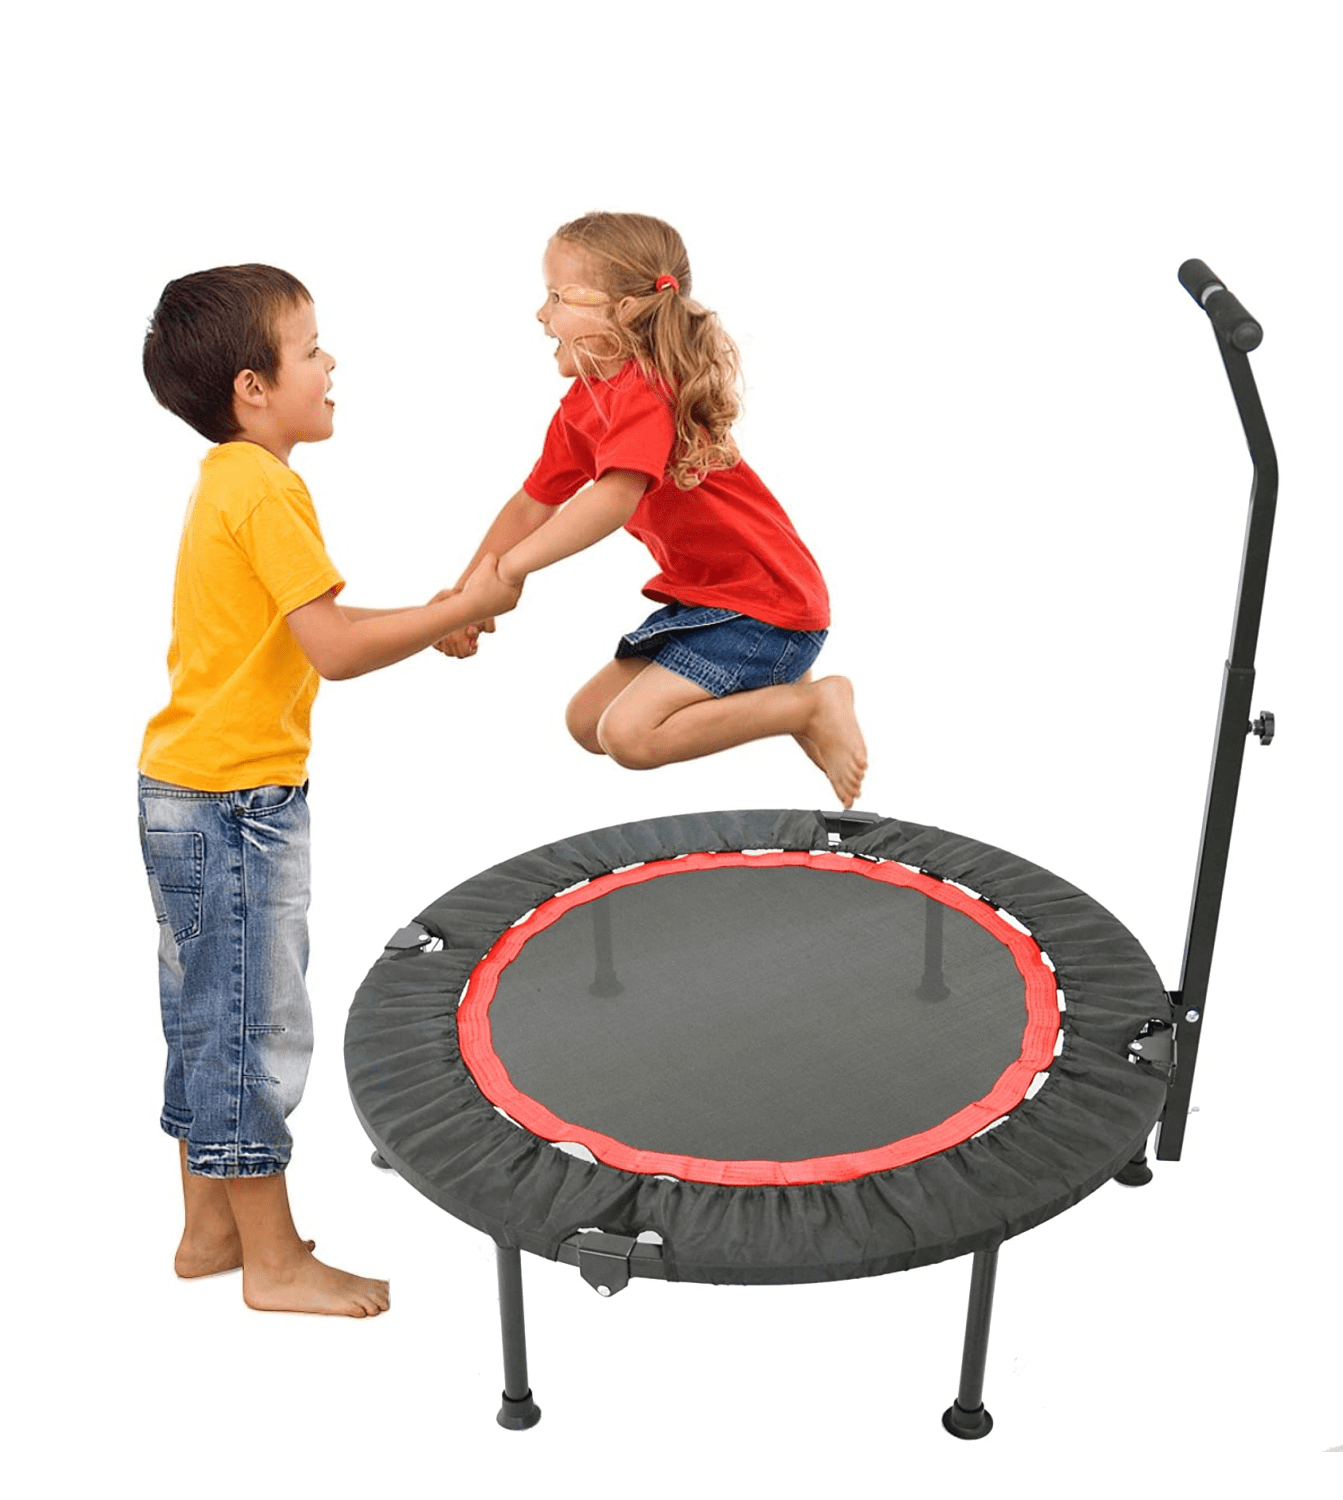 Mini Trampoline Rebounder for Adult 40 Foldable Fitness Exercise Trampoline with Adjustable Handrail for Home Gym Workout Cardio Training Max. Load 300lbs